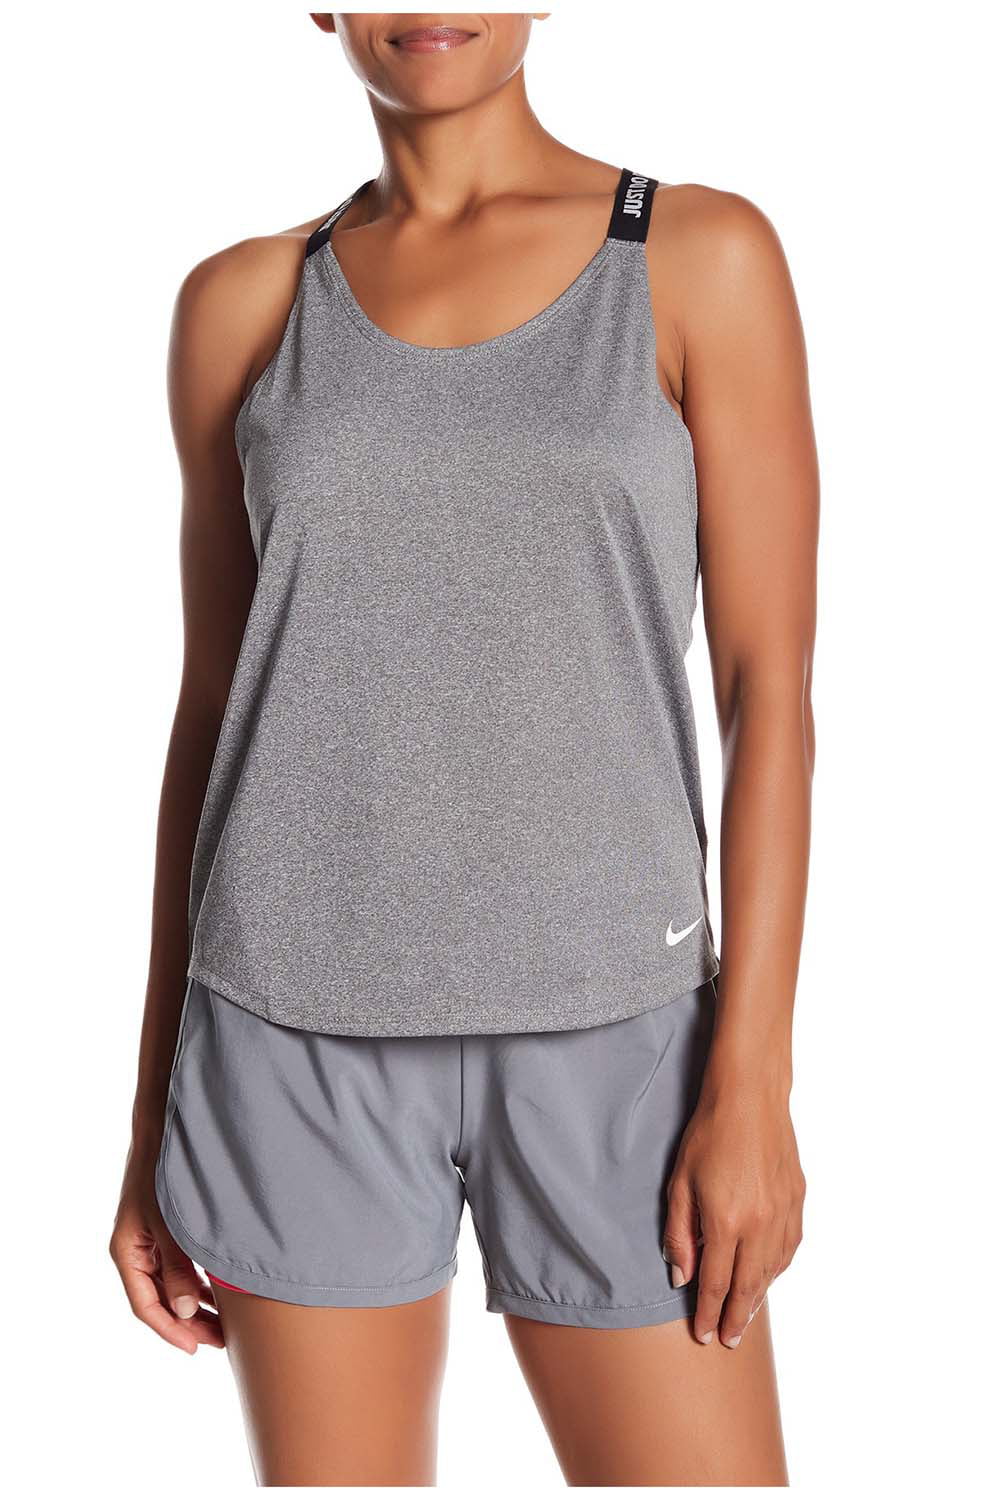 Best Nike workout tank tops for Burn Fat fast